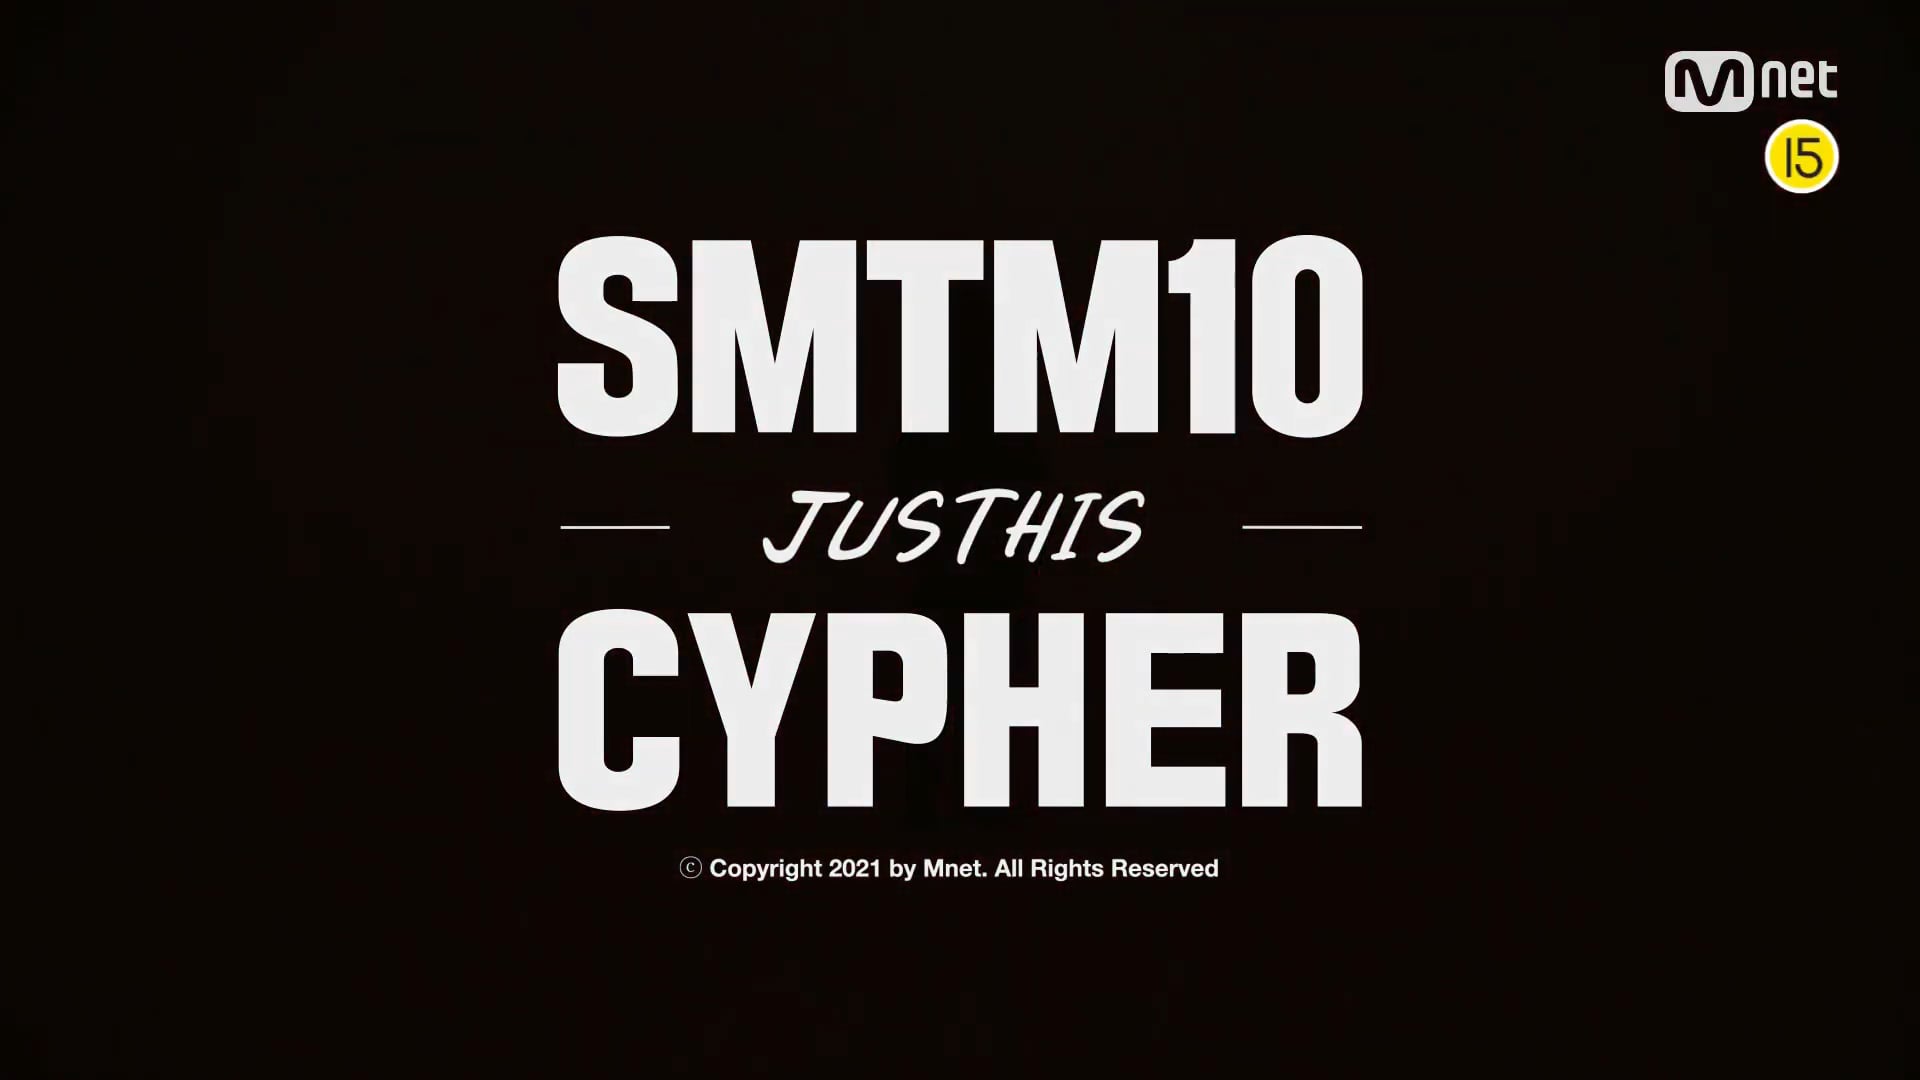 [ENG] [SMTM10] SPECIAL CYPHER -JUSTHIS